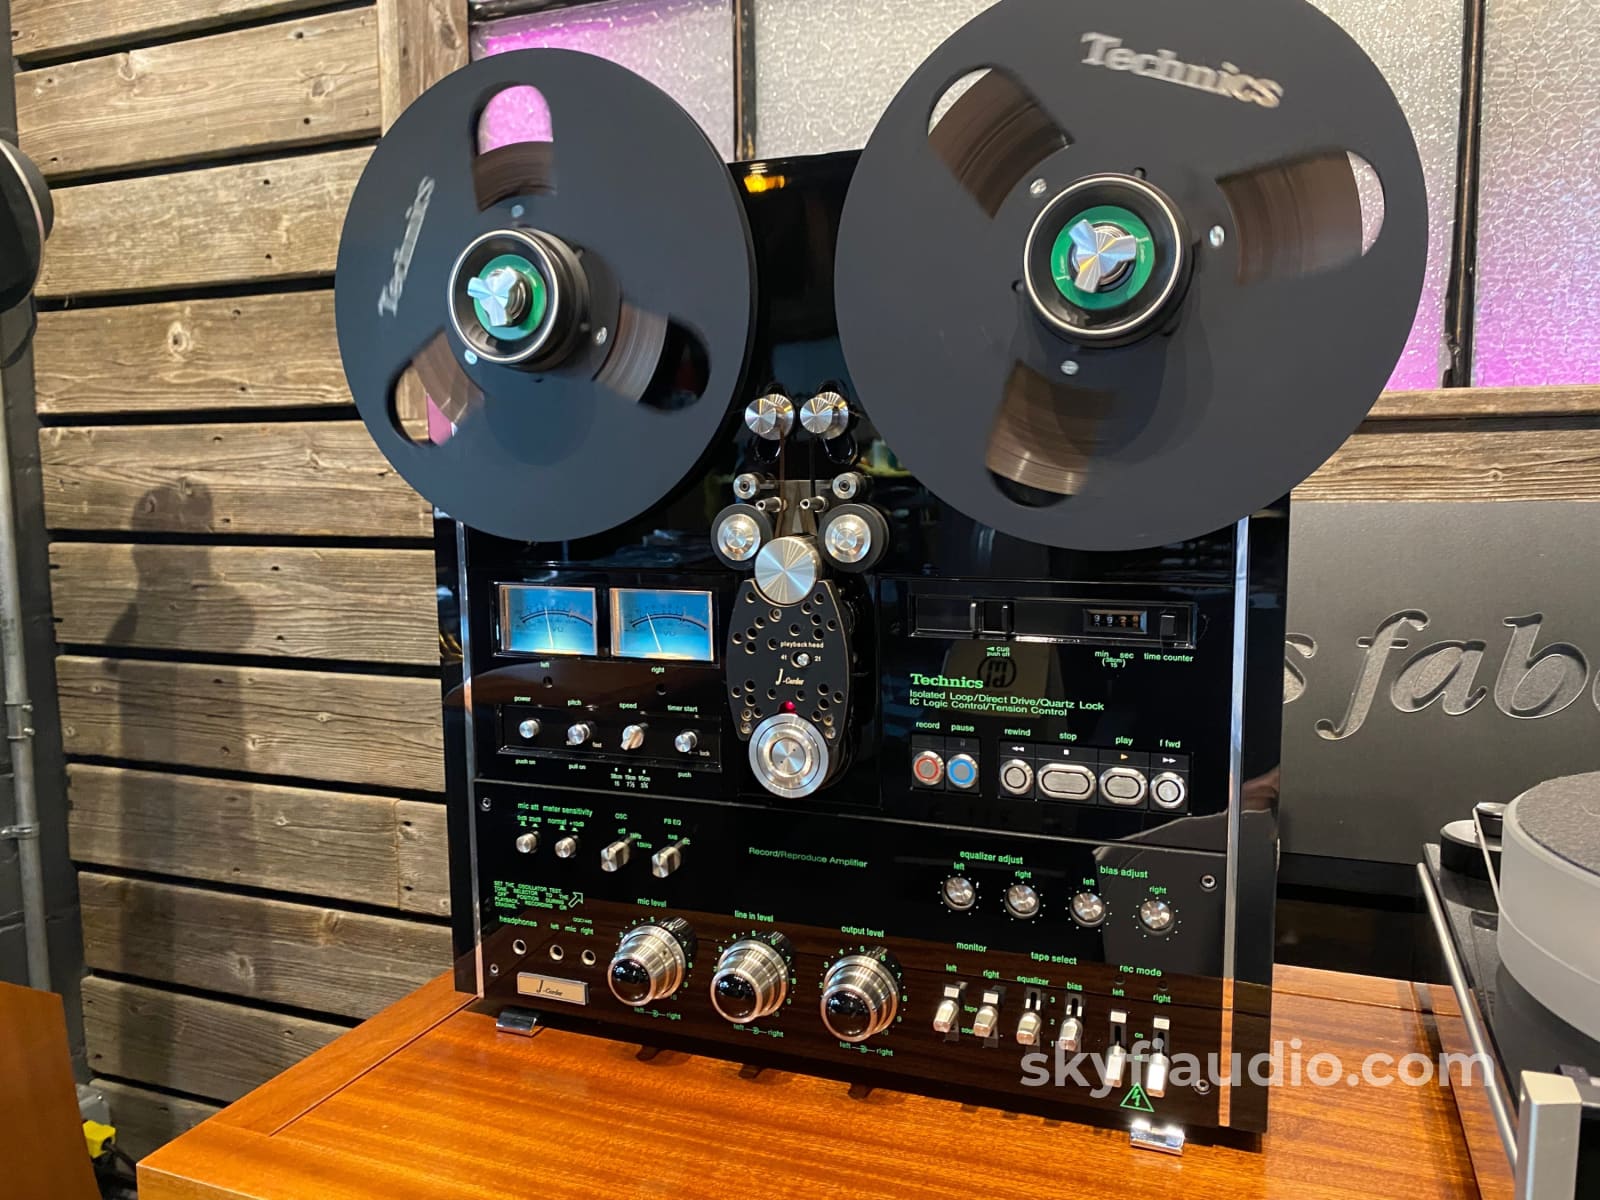 Technics Rs-1520 Reel To Fully Restored - Mcintosh Tribute With Upgrades Pre-Order Now Tape Deck